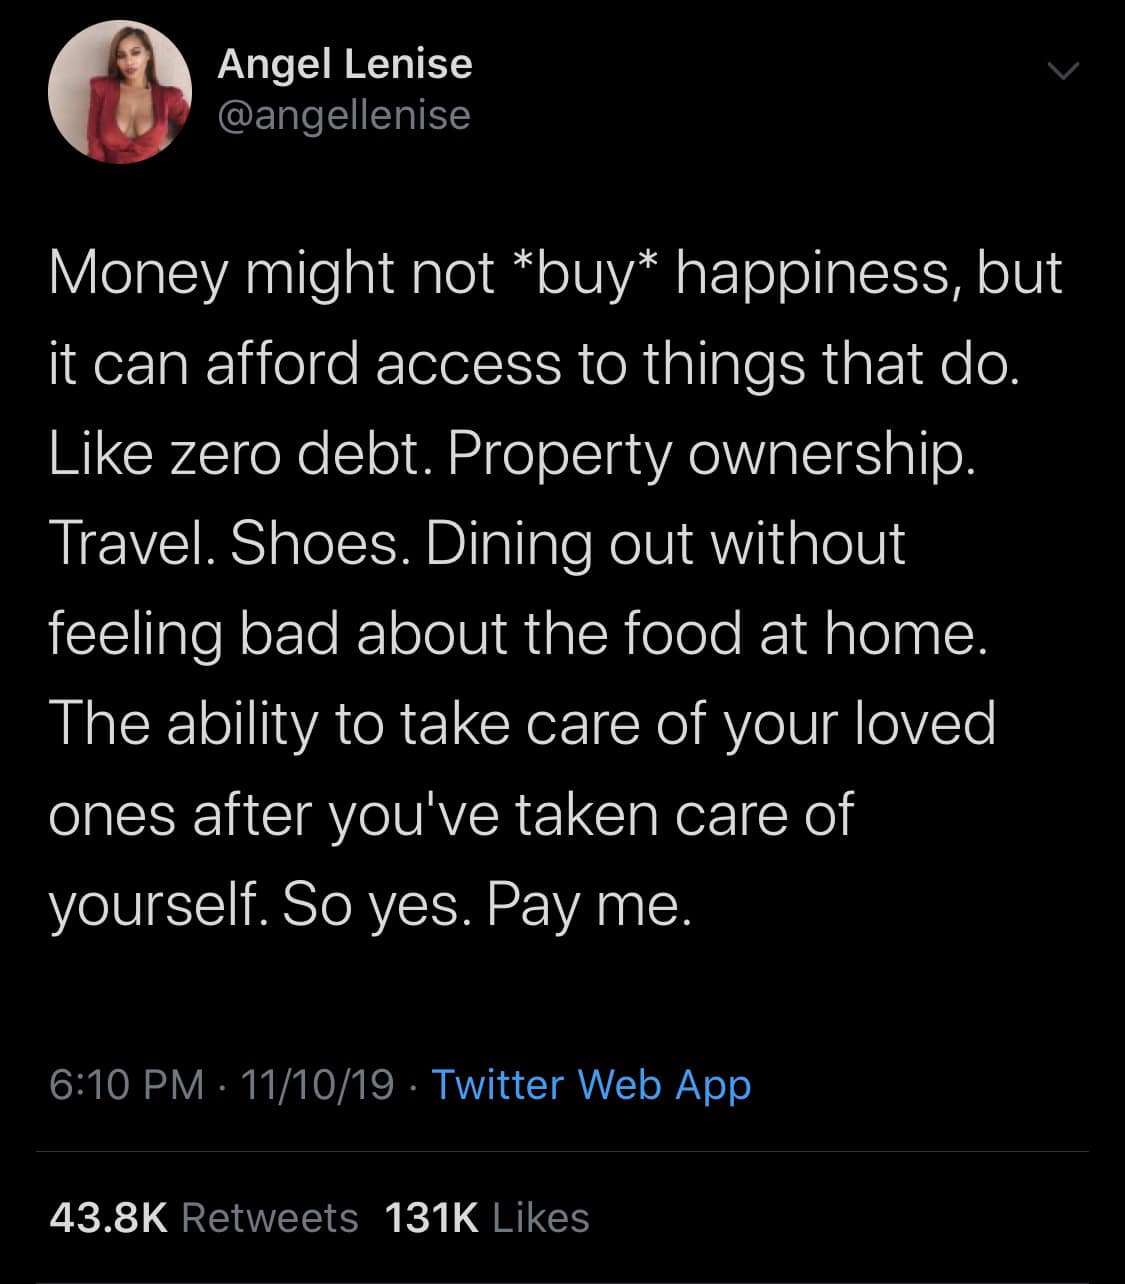 tweets black-twitter-memes tweets text: Angel Lenise .4 @angellenise Money might not *buy* happiness, but it can afford access to things that do. Like zero debt. Property ownership. Travel. Shoes. Dining out without feeling bad about the food at home. The ability to take care of your loved ones after youlve taken care of yourself. So yes. Pay me. 6:10 PM • 11/10/19 • Twitter Web App 43.8K 131K Likes Retweets 